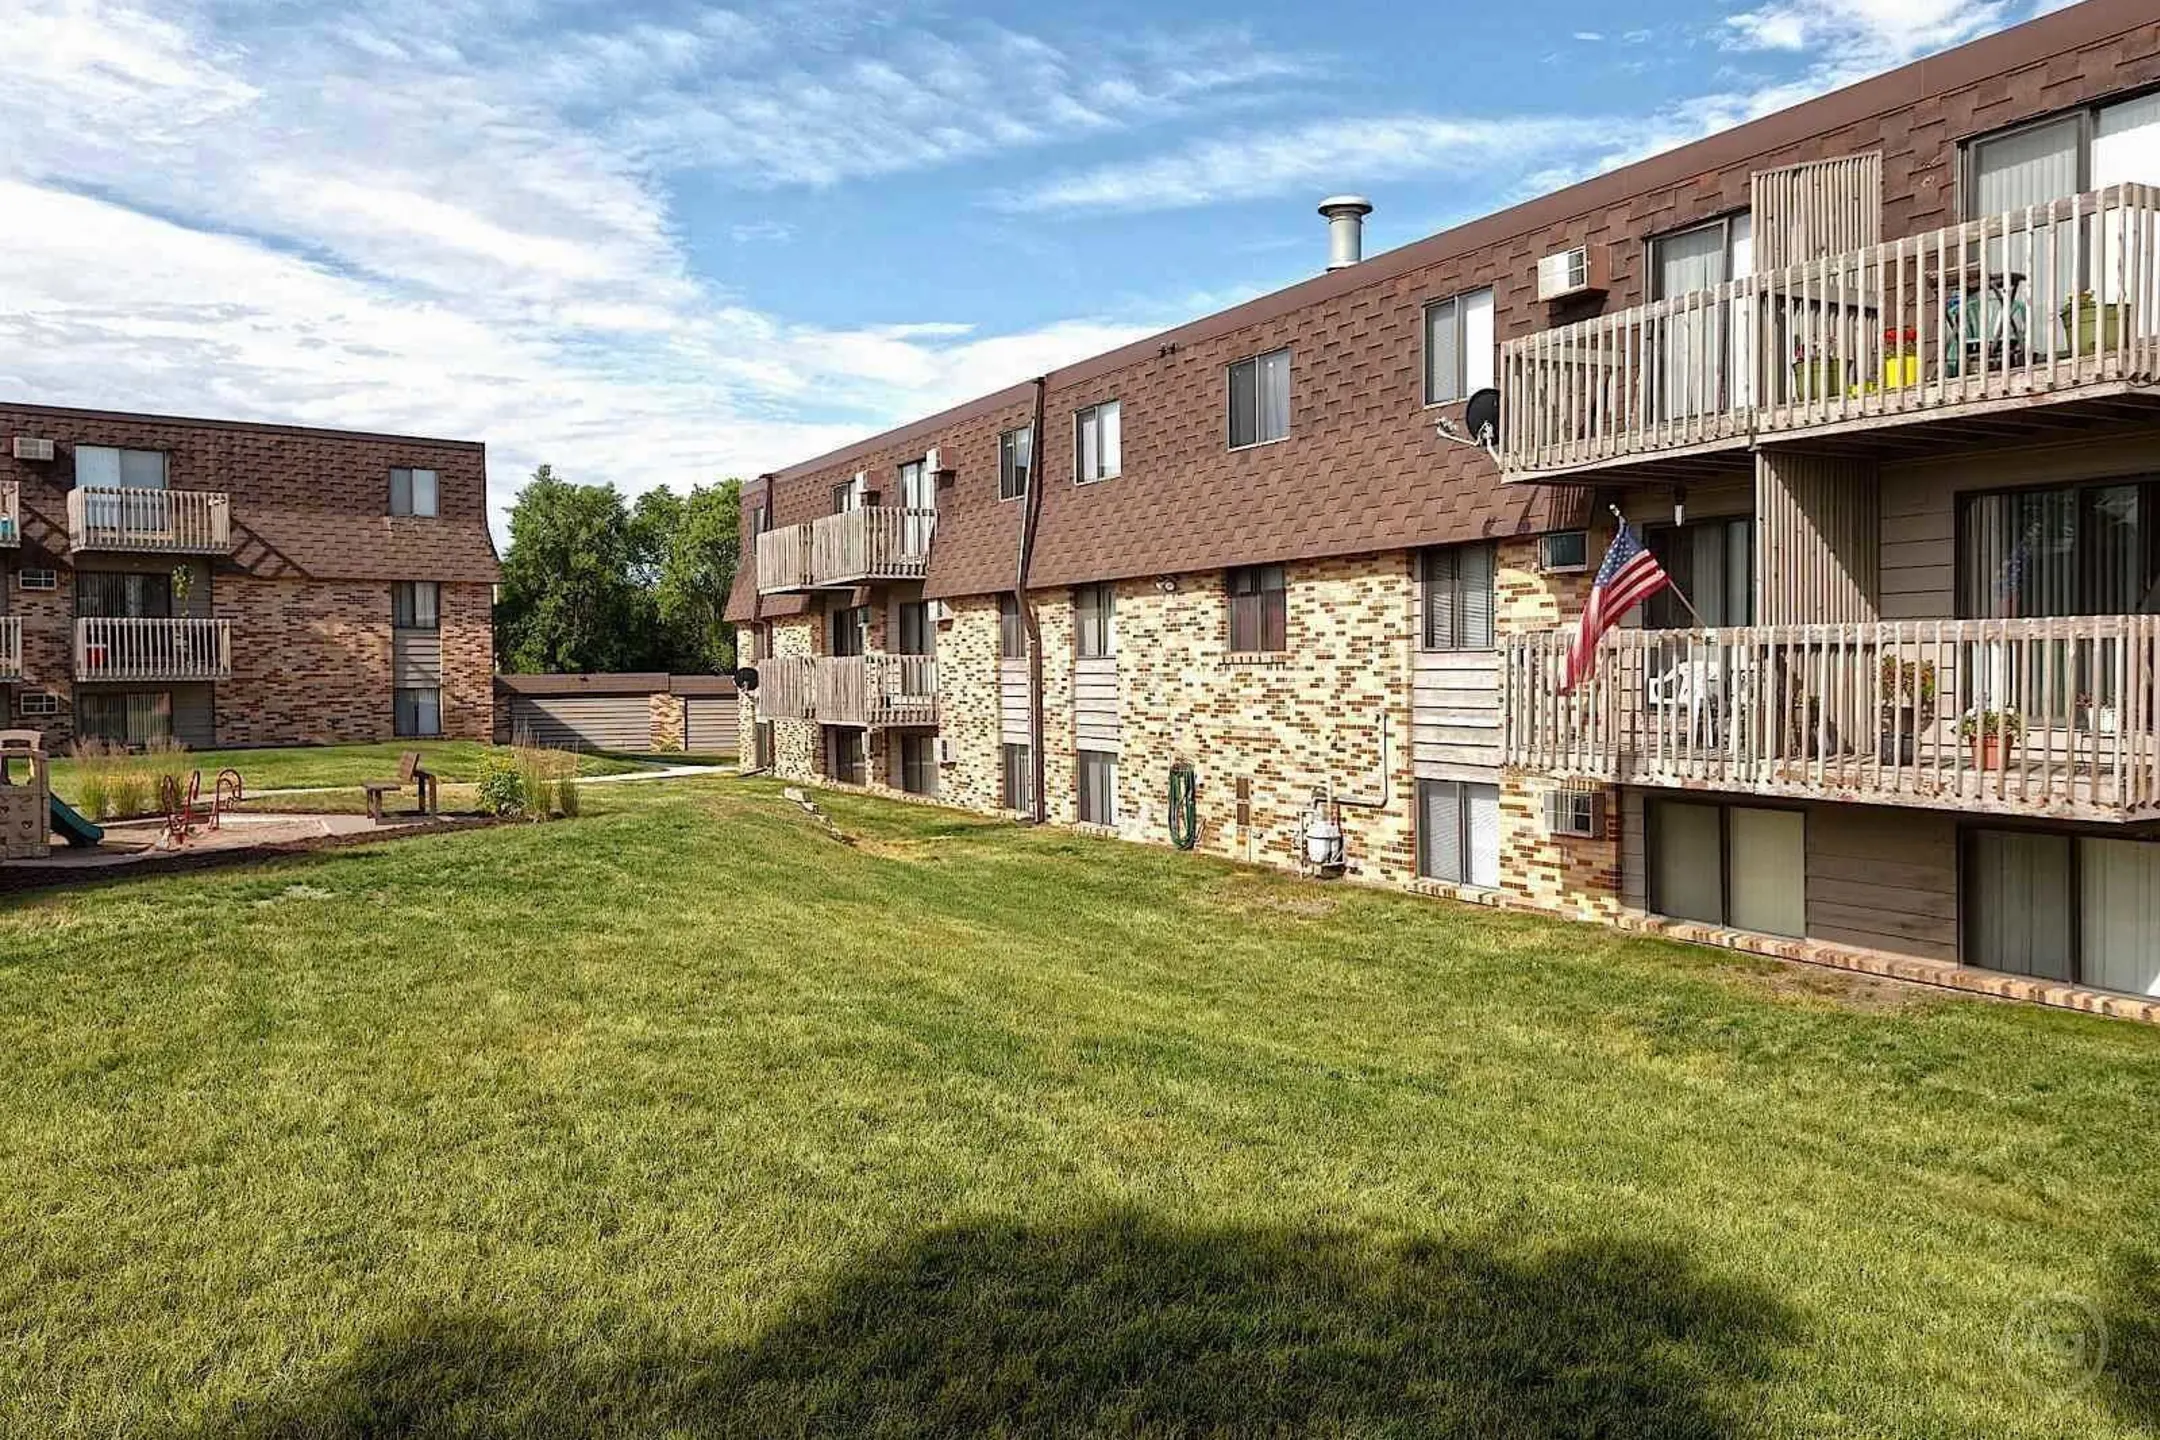 Building - The Bluffs Apartments - Monticello, MN